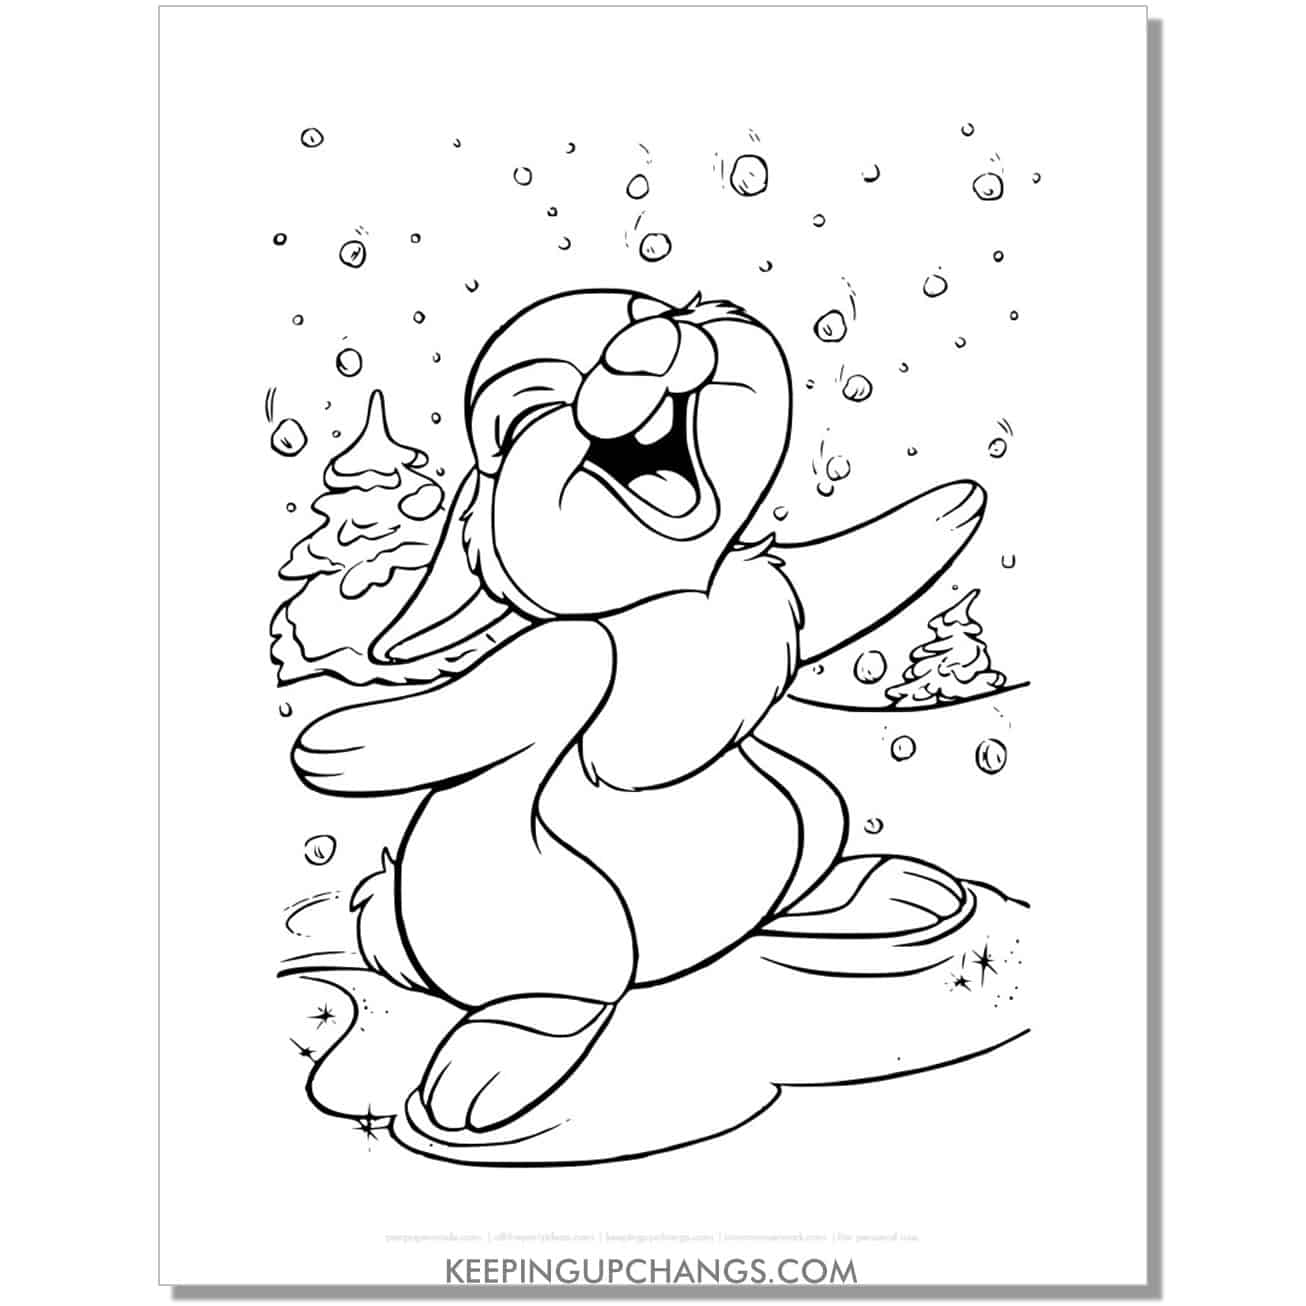 free thumper playing in the snow bambi coloring page, sheet.